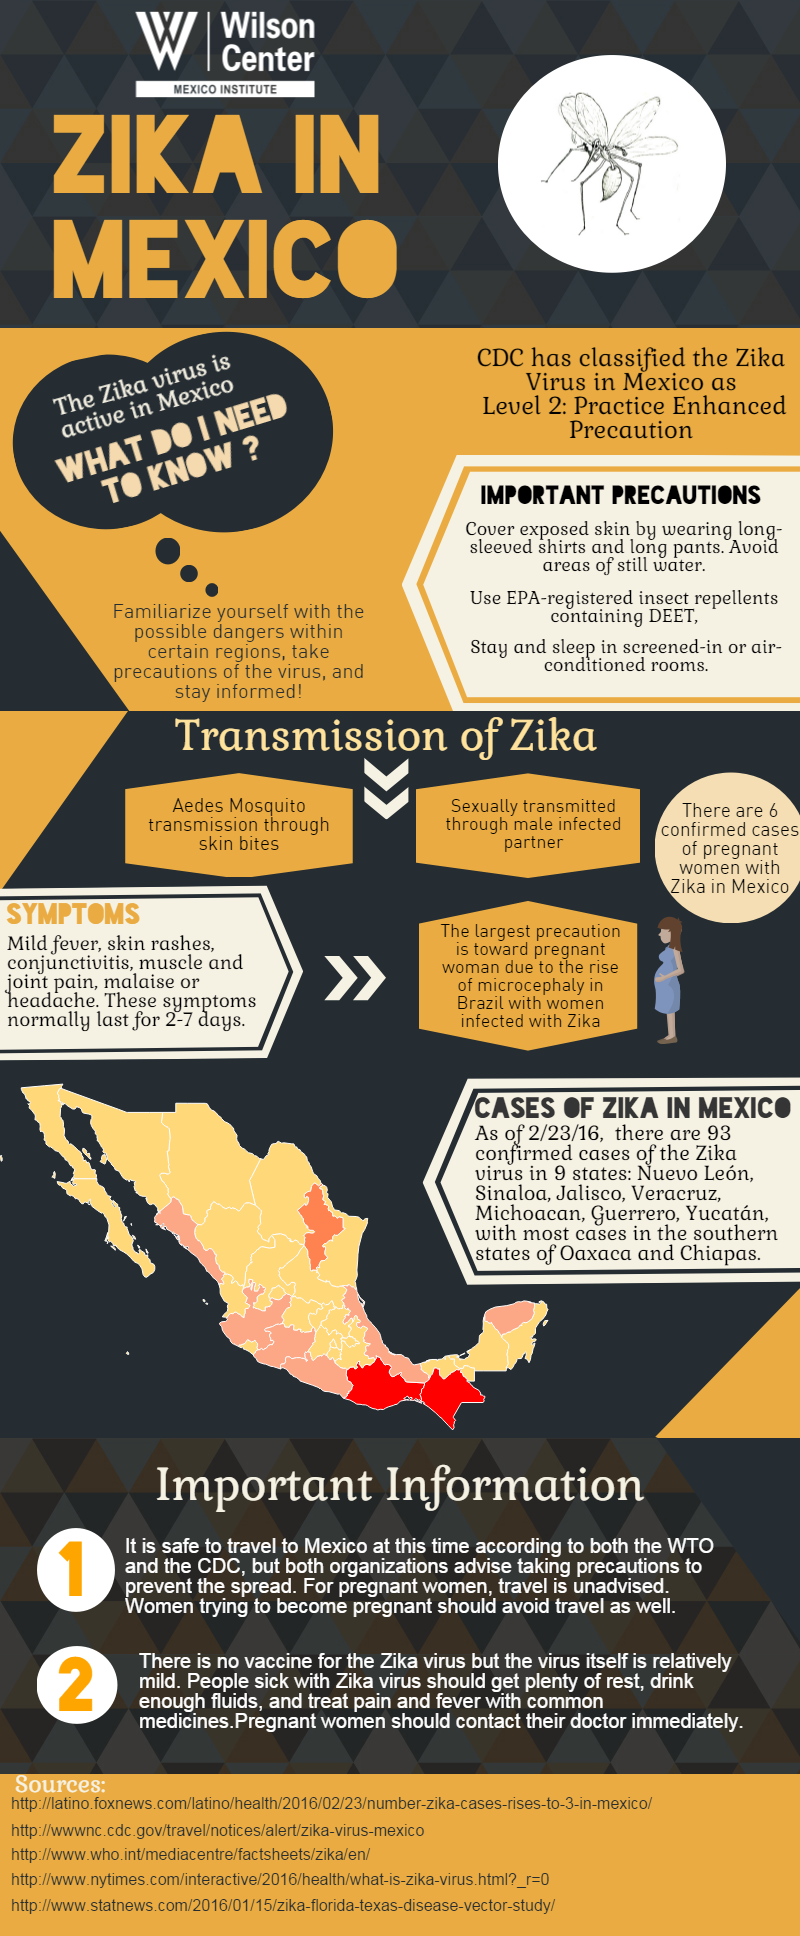 Infographic Zika in Mexico Wilson Center